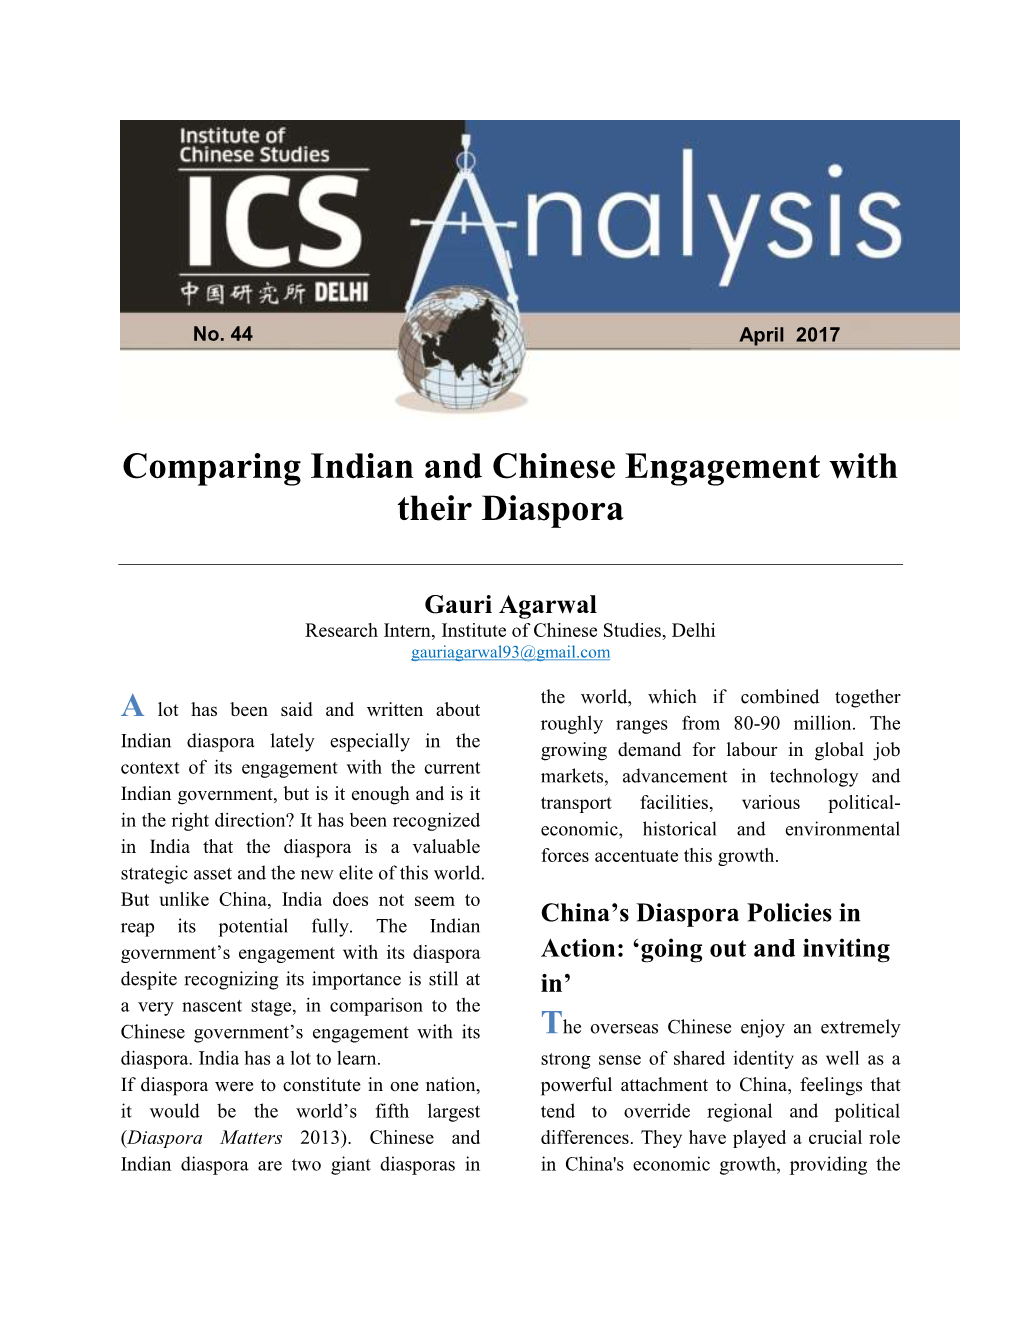 Comparing Indian and Chinese Engagement with Their Diaspora